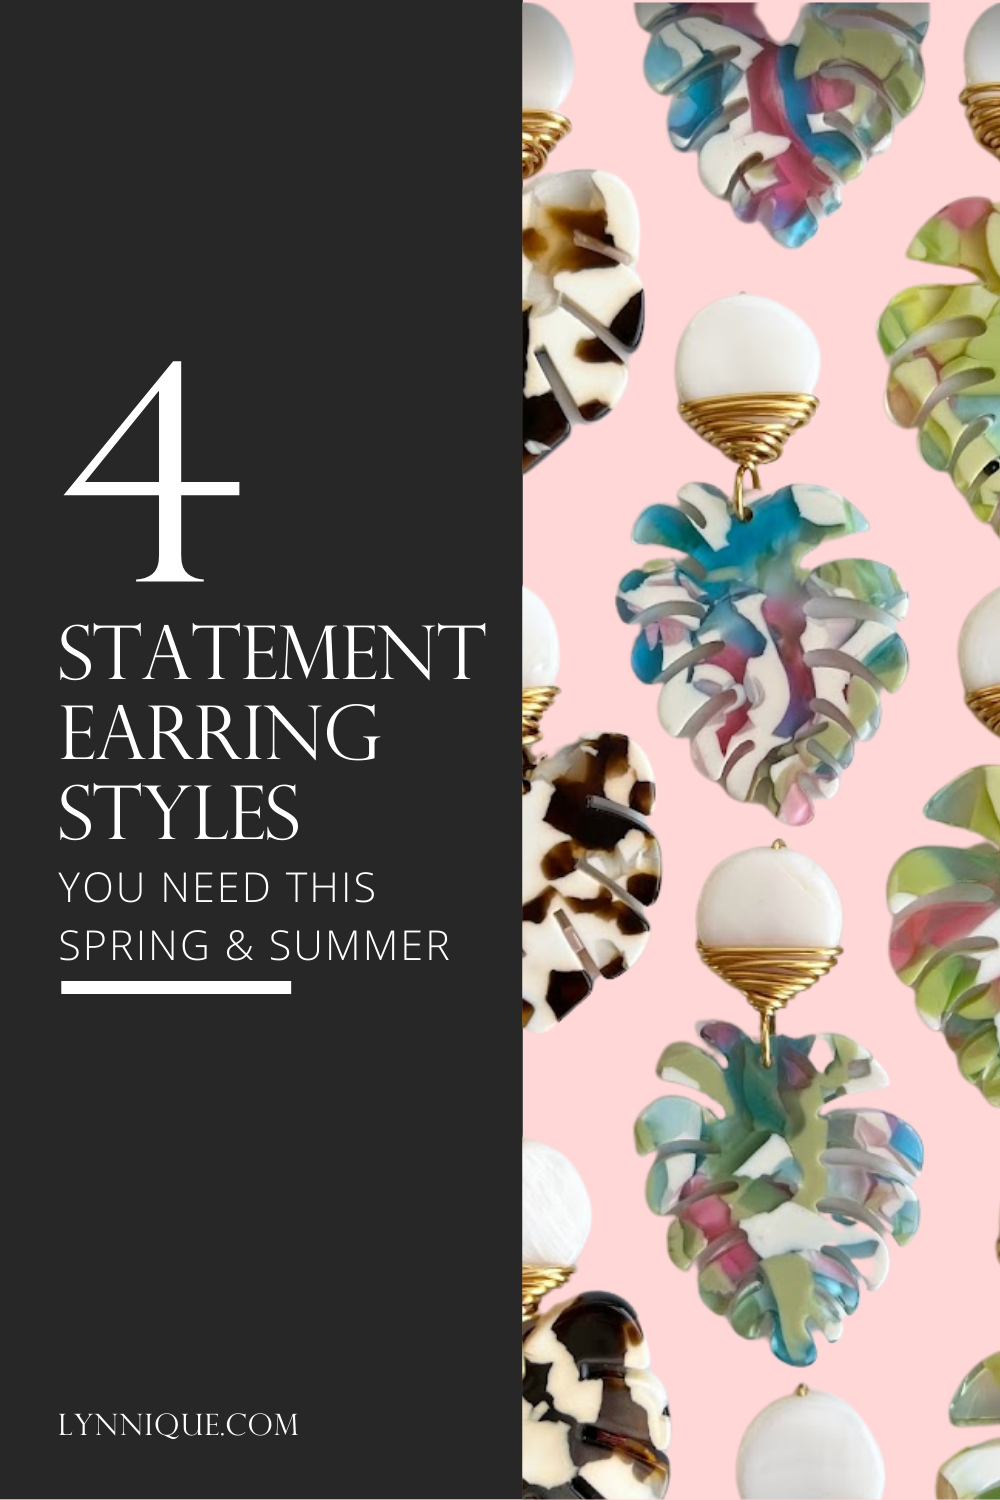 4 Statement Earrings You Need this Spring and Summer